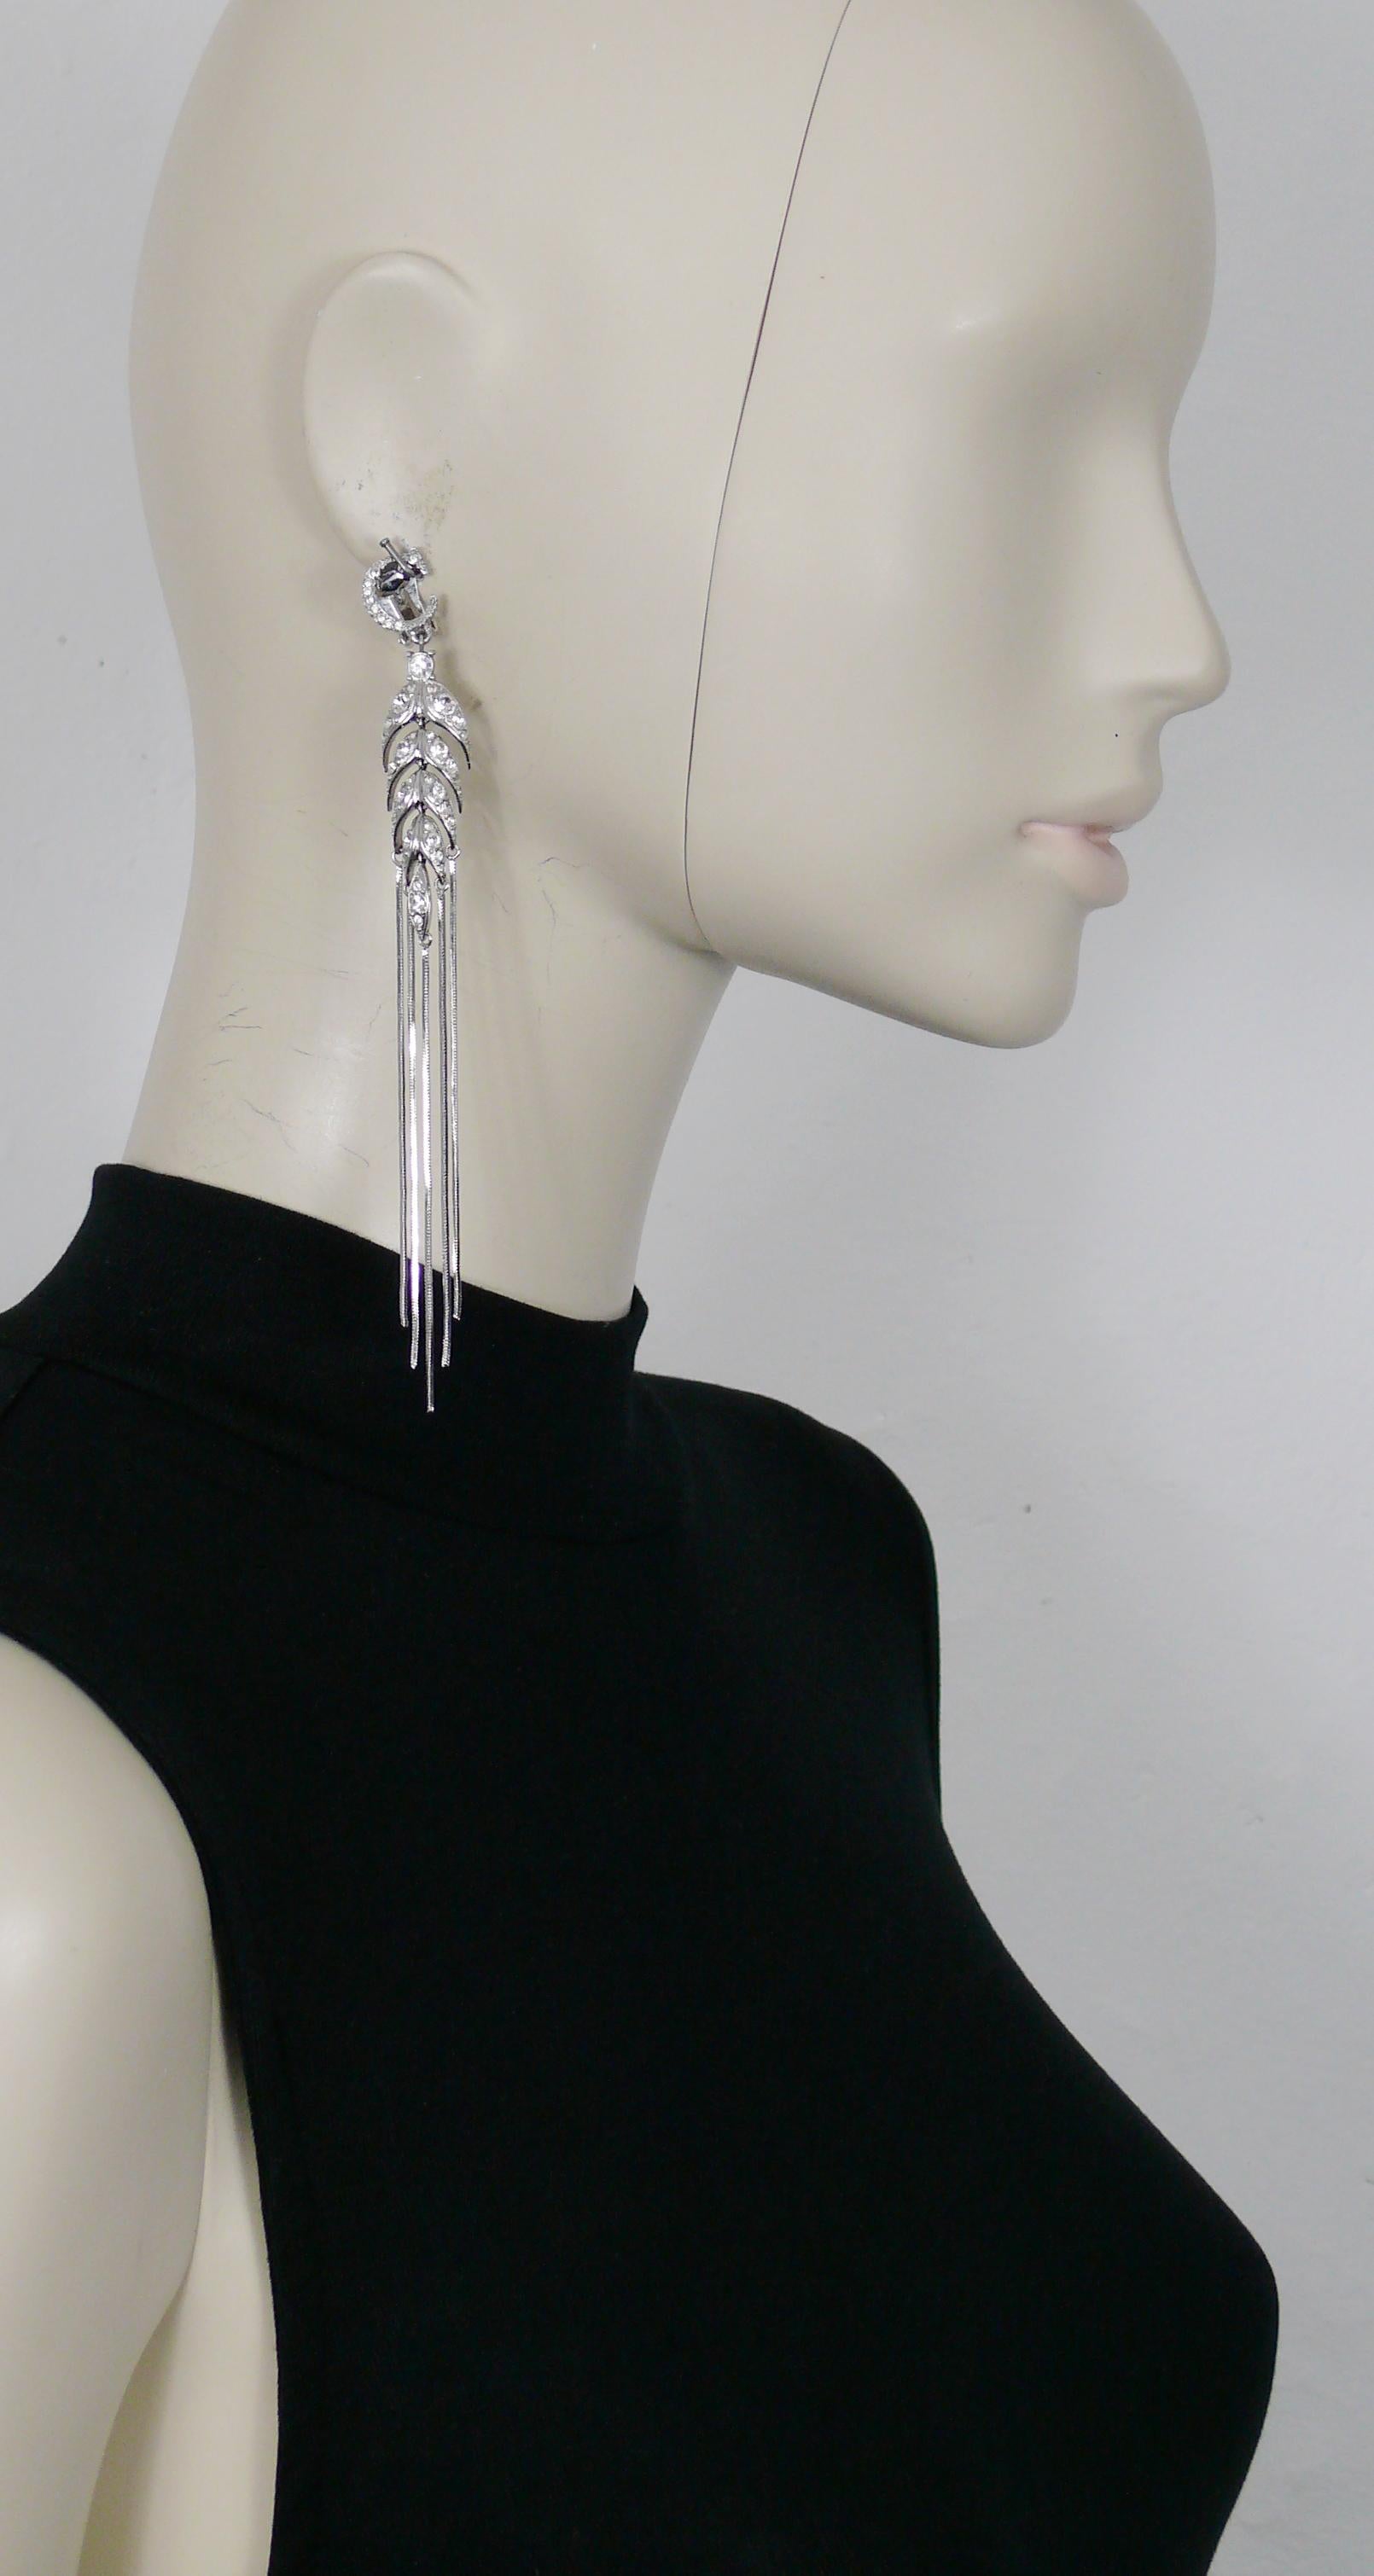 CHRISTIAN DIOR vintage silver toned dangling (clip-on) earrings featuring an articulated ear of wheat embellished with chains shower and clear crystals. One earring is topped by a C initial and the other by a D.

Silver tone metal